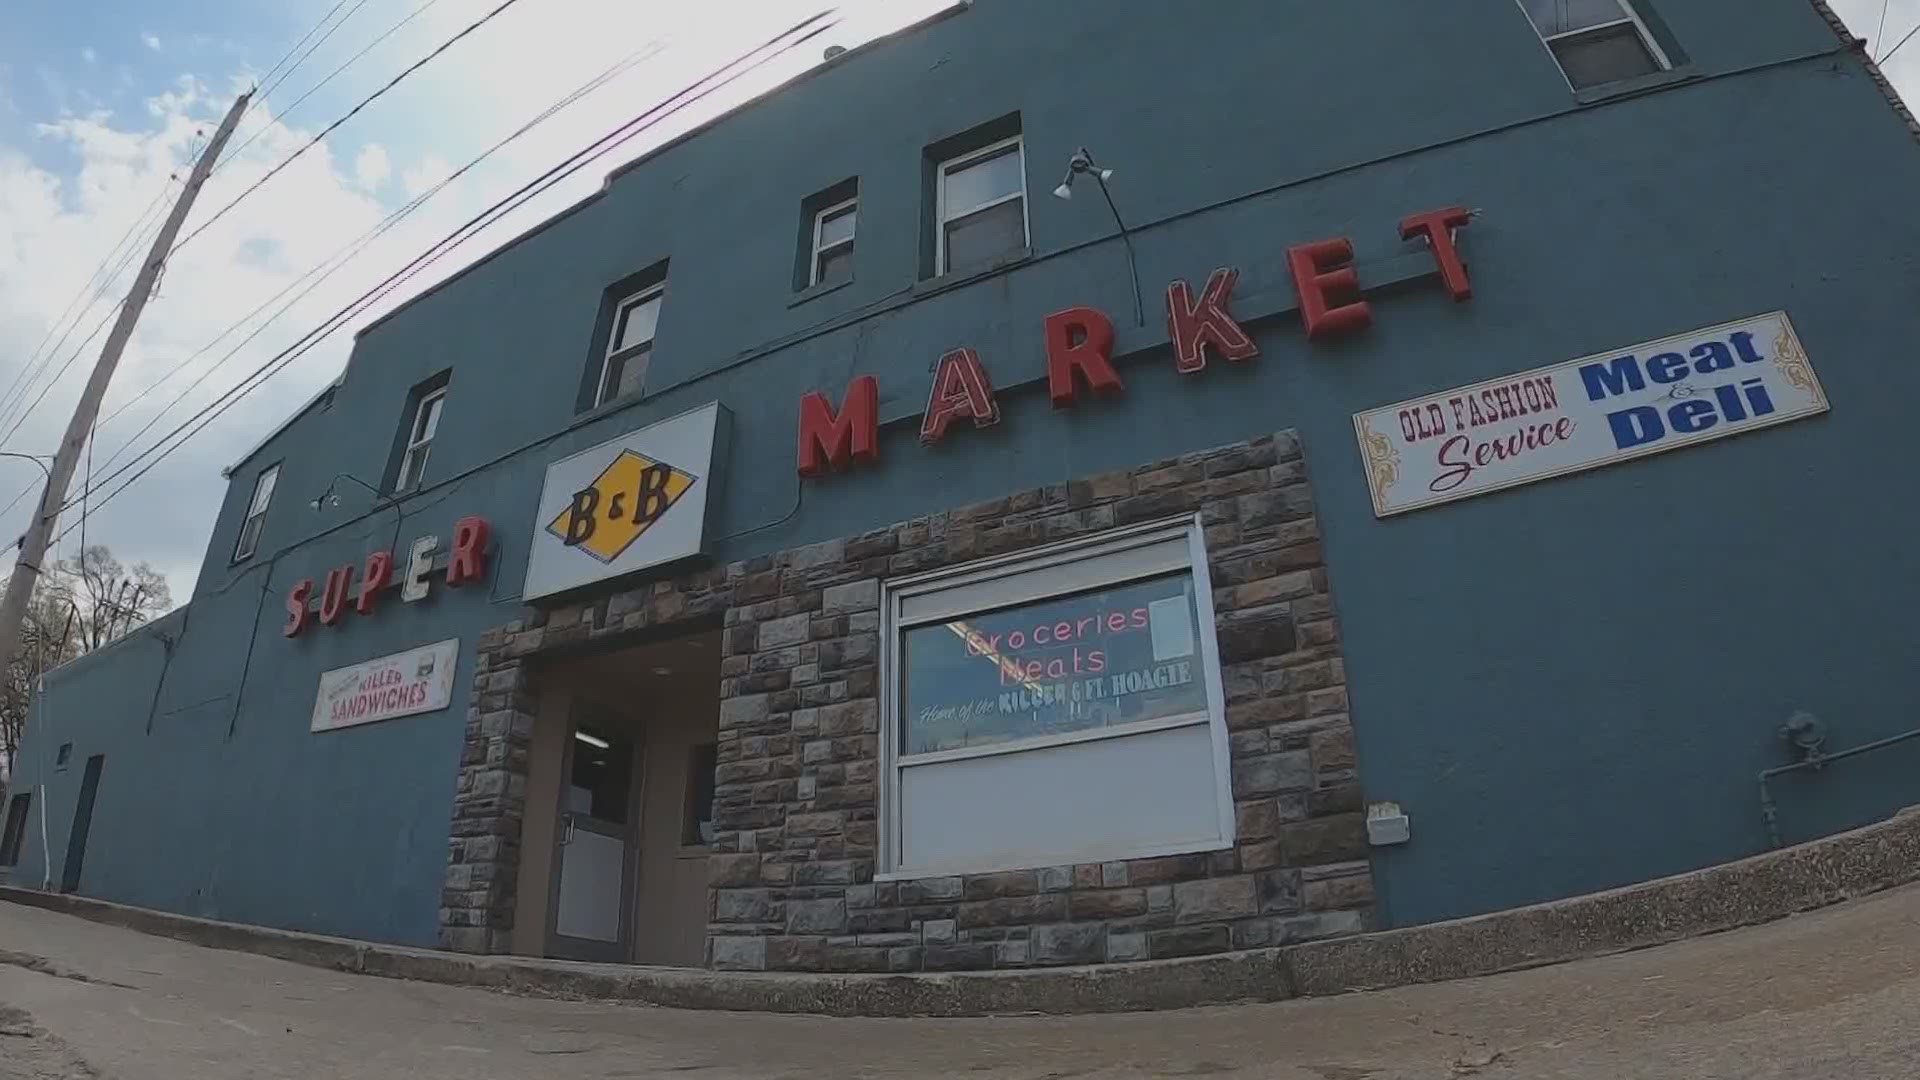 98-year-old local grocery store surviving during pandemic